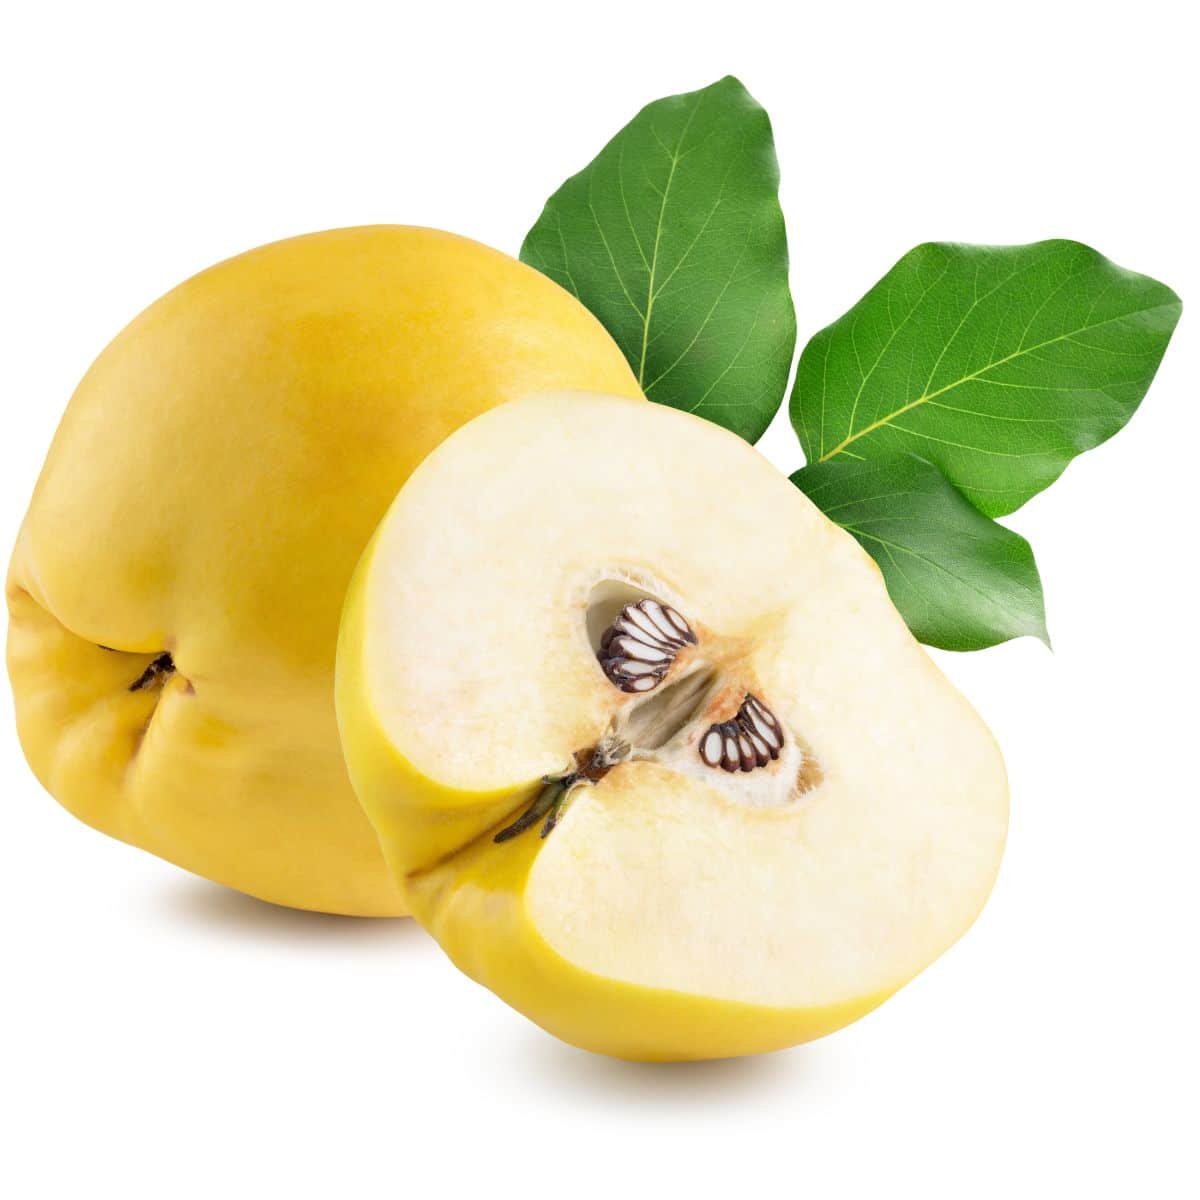 Two quinces on an isolated white background.